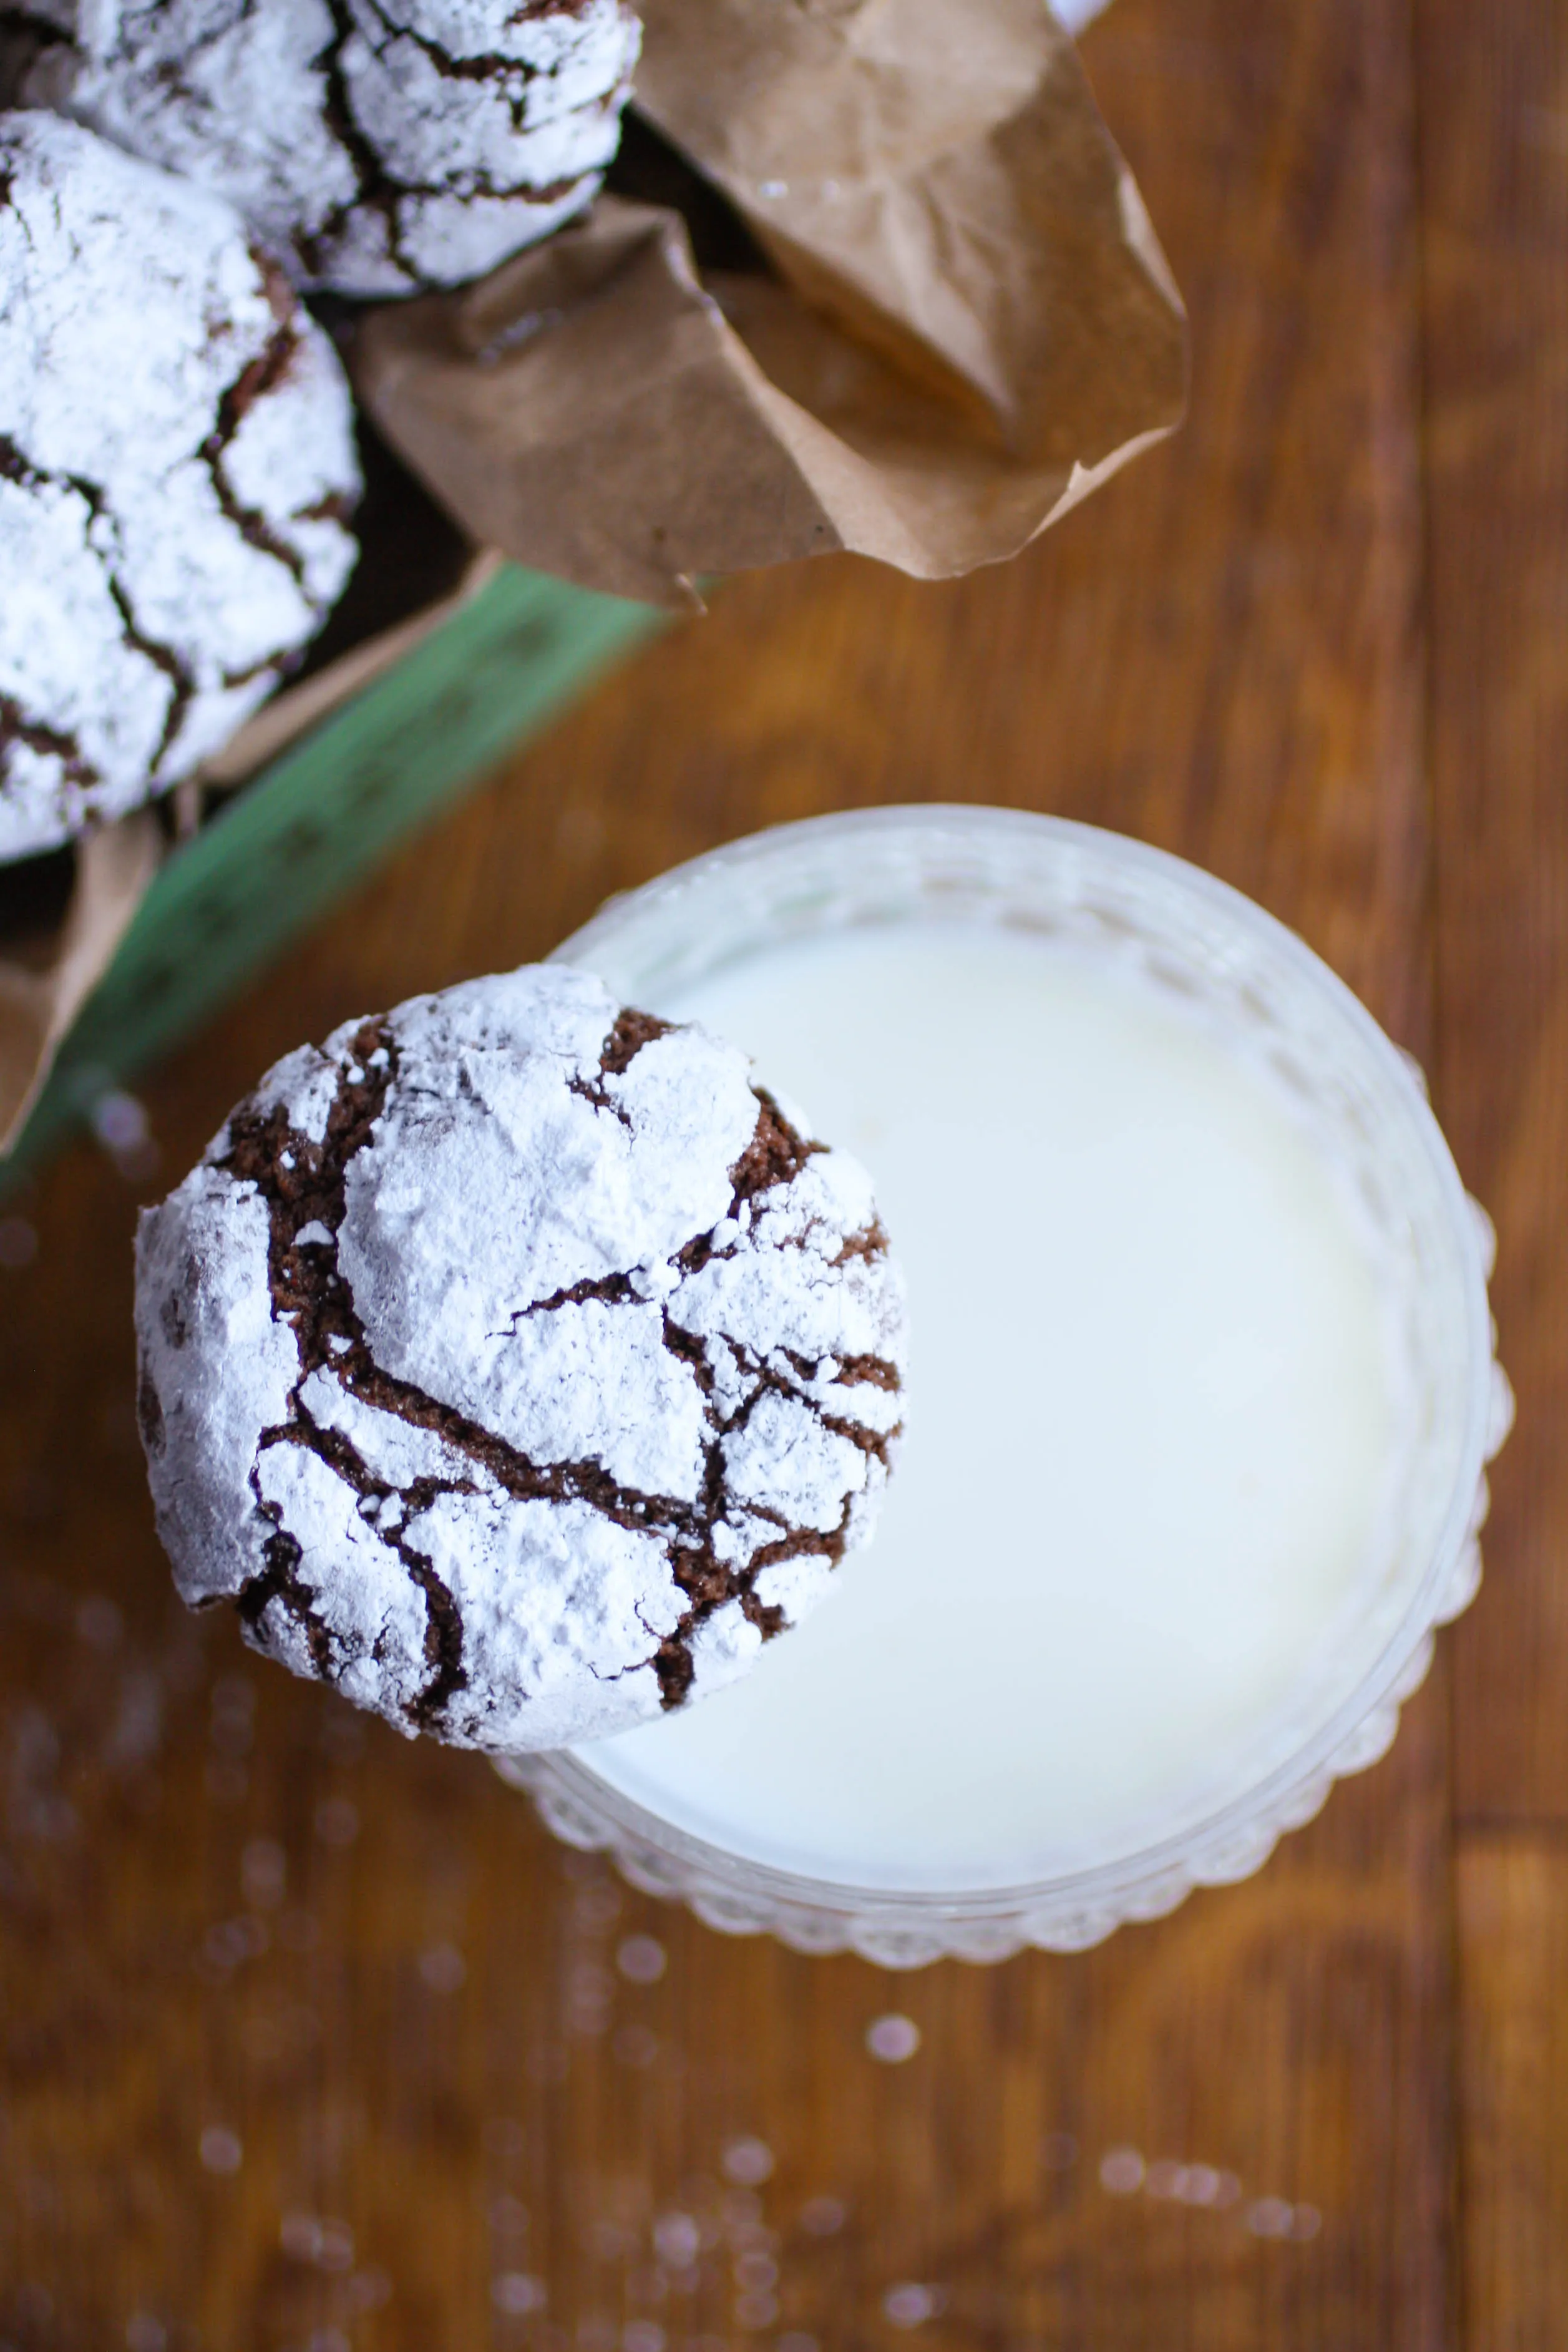 Chocolate-Chili Crinkle Cookies are delicious cookie treats! You'll love how rich and decadent these cookies are!